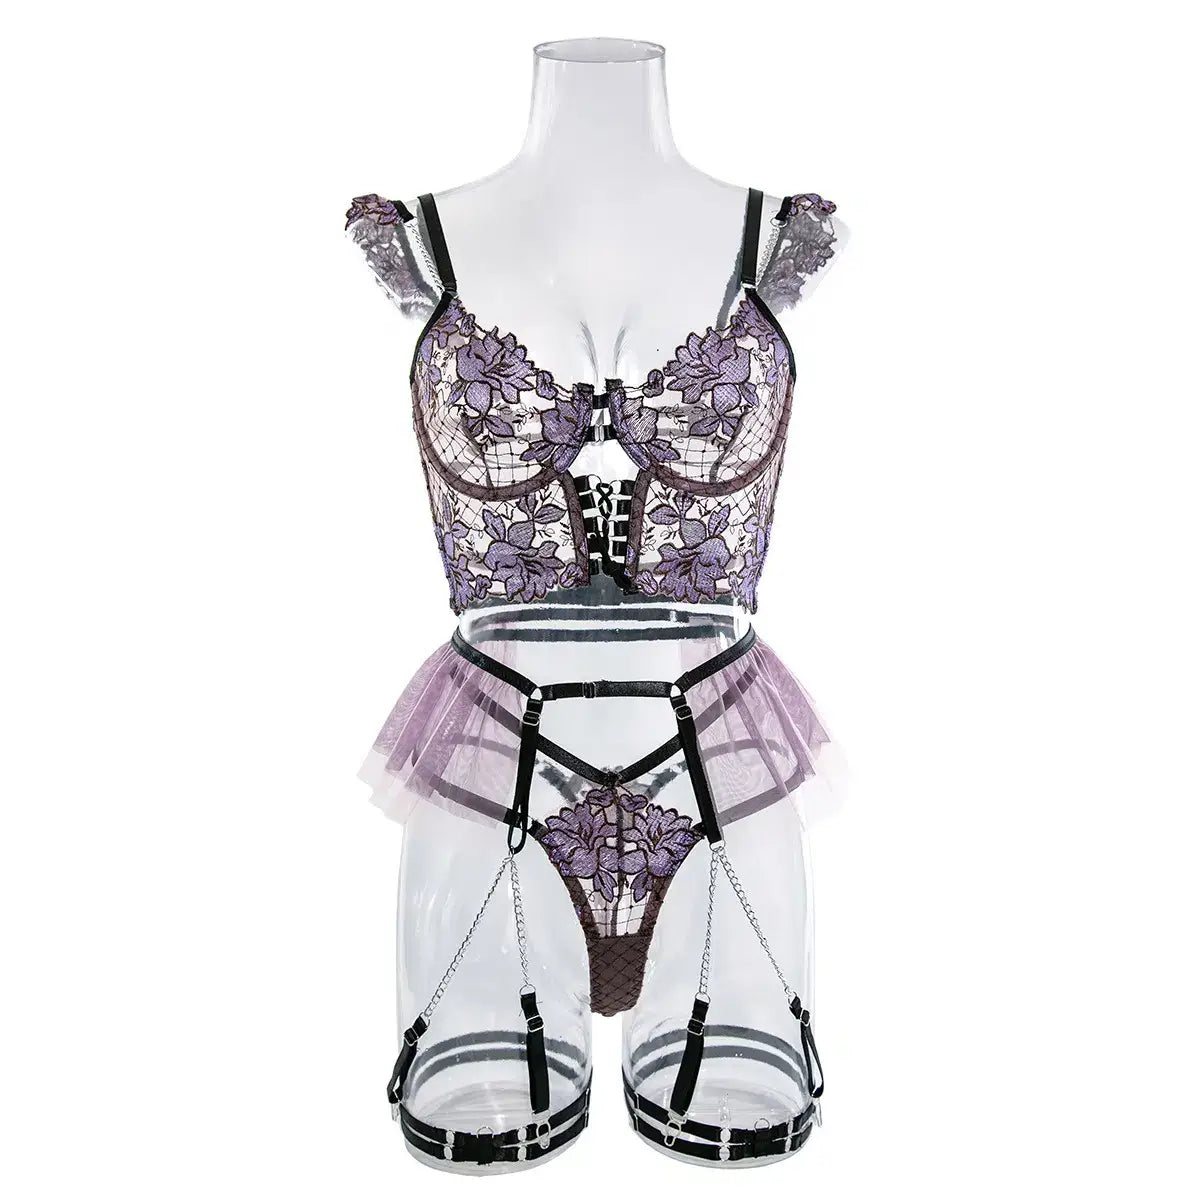 Embroidered mesh bustier set with metal chain shoulder strap - sets